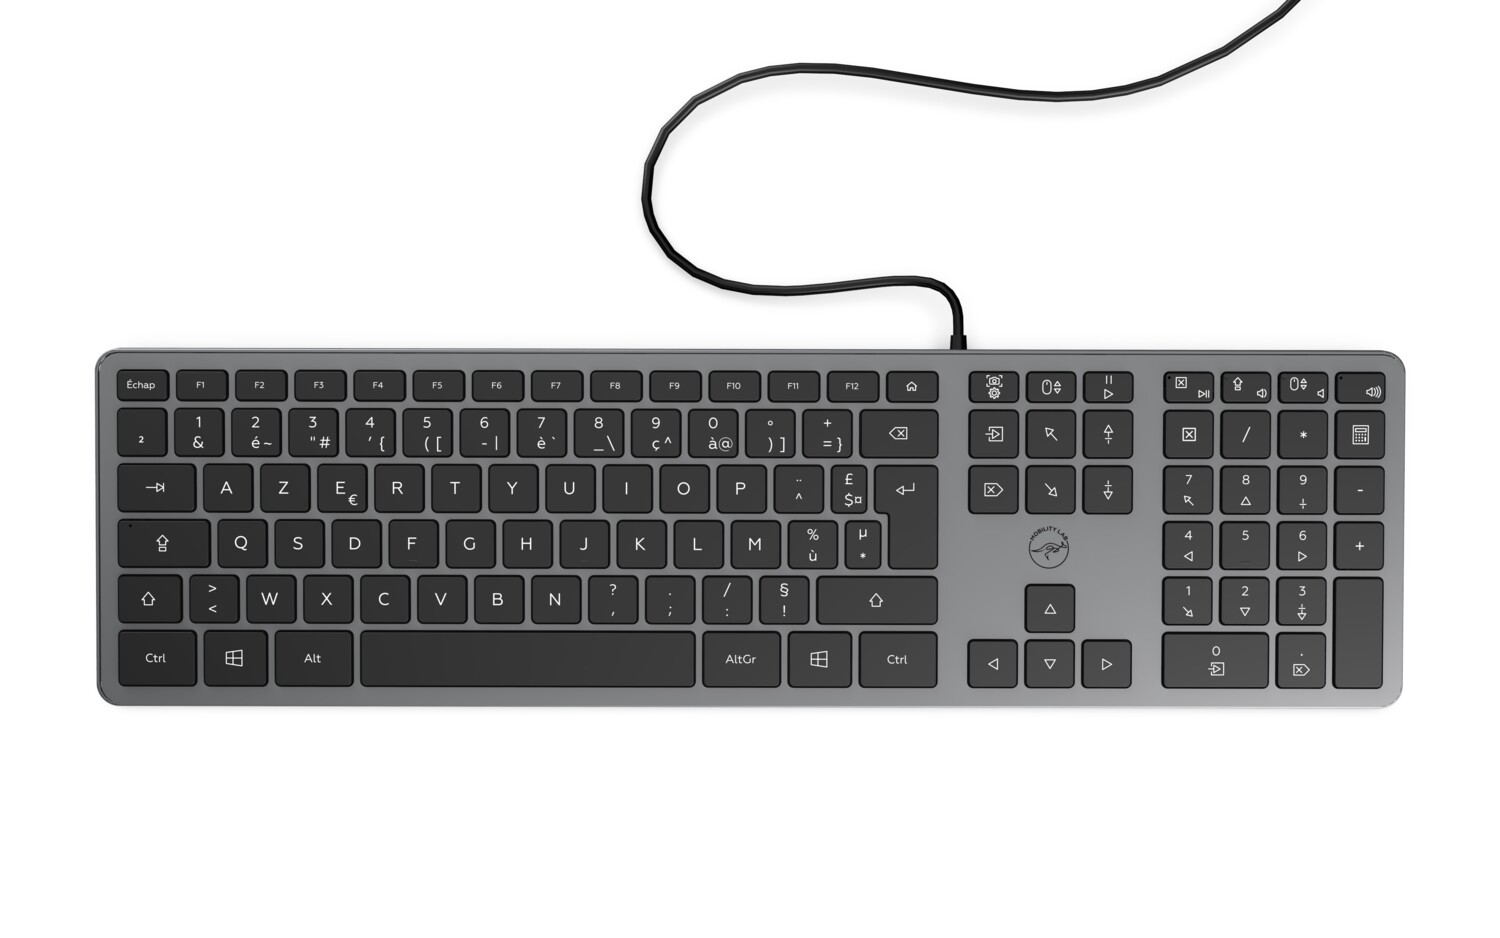 Clavier filaire Slim Mobility Lab, Claviers filaires